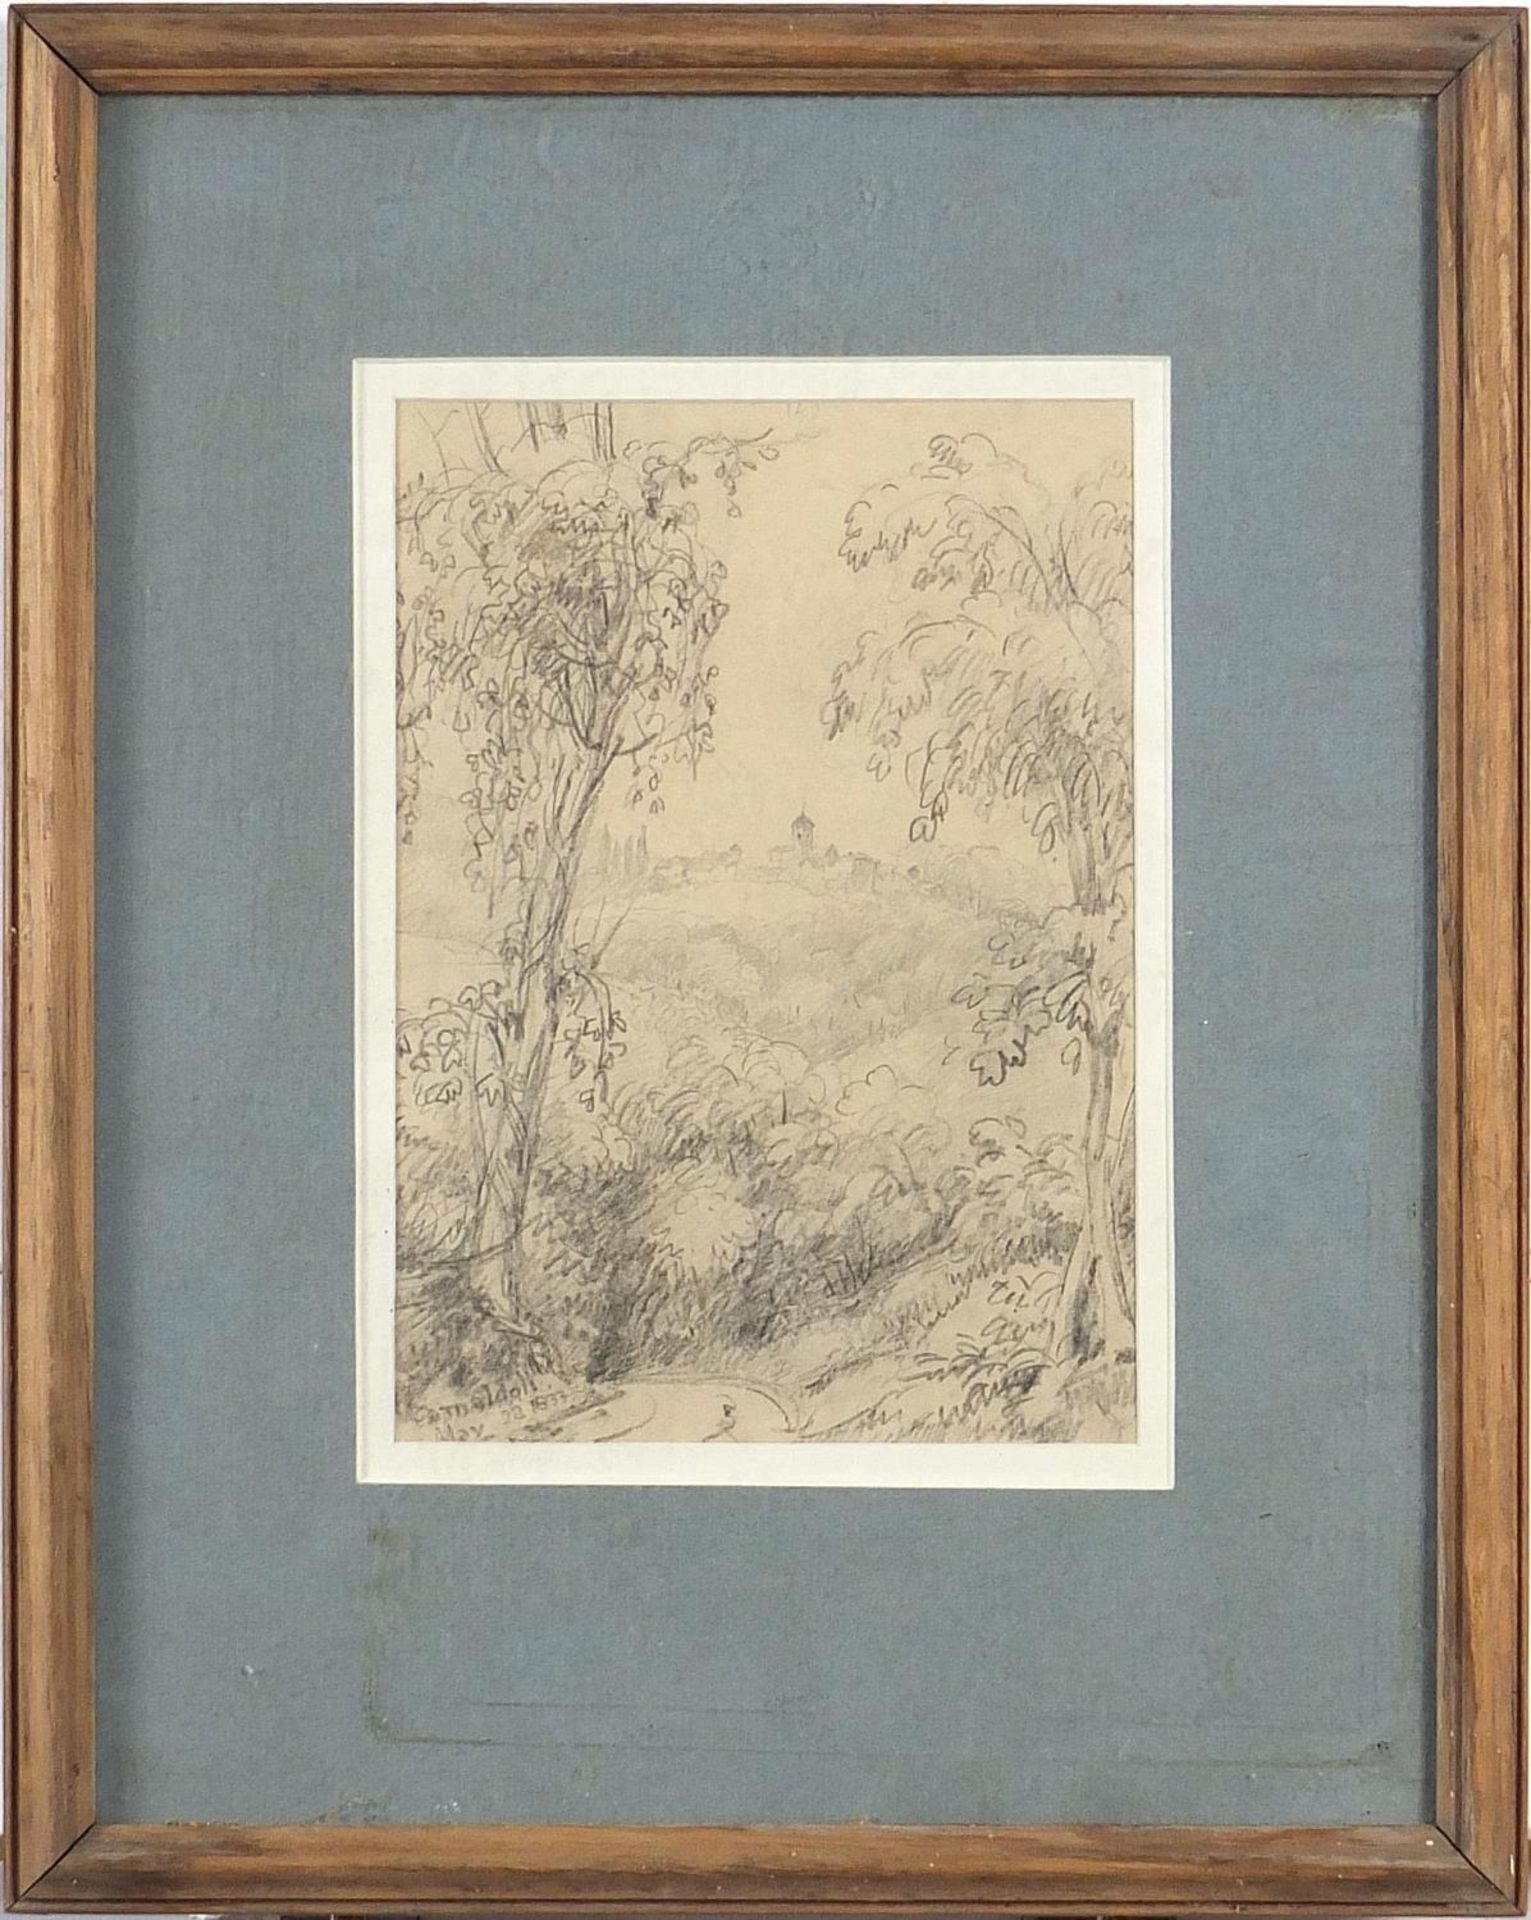 Lady Elizabeth Percy - Tuscan landscape, 19th century pencil sketch, Agnew Gallery label and details - Image 2 of 5